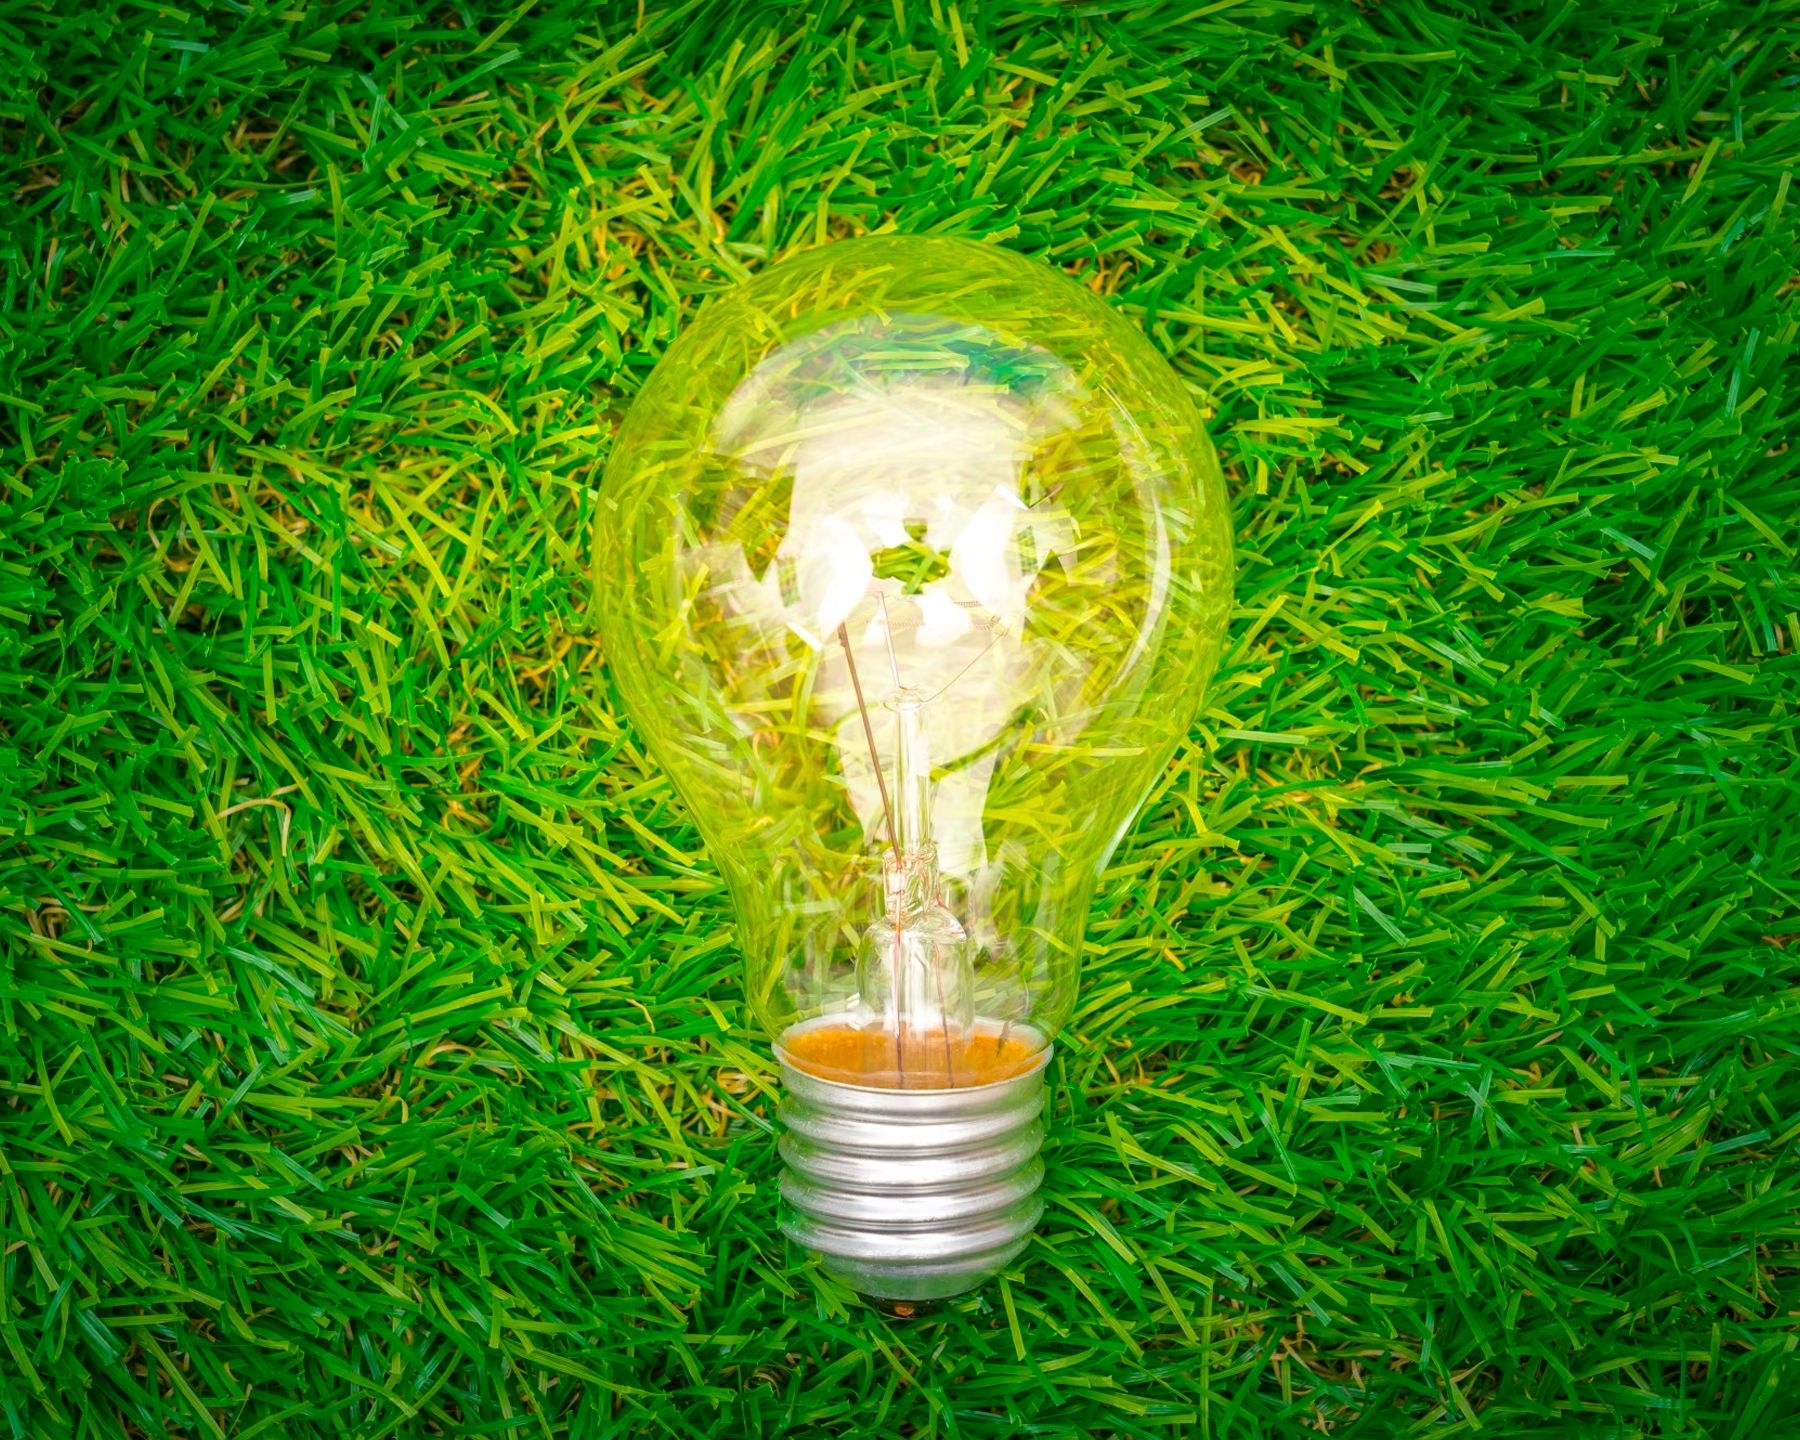 Energy efficient lightbulb displayed in the grass